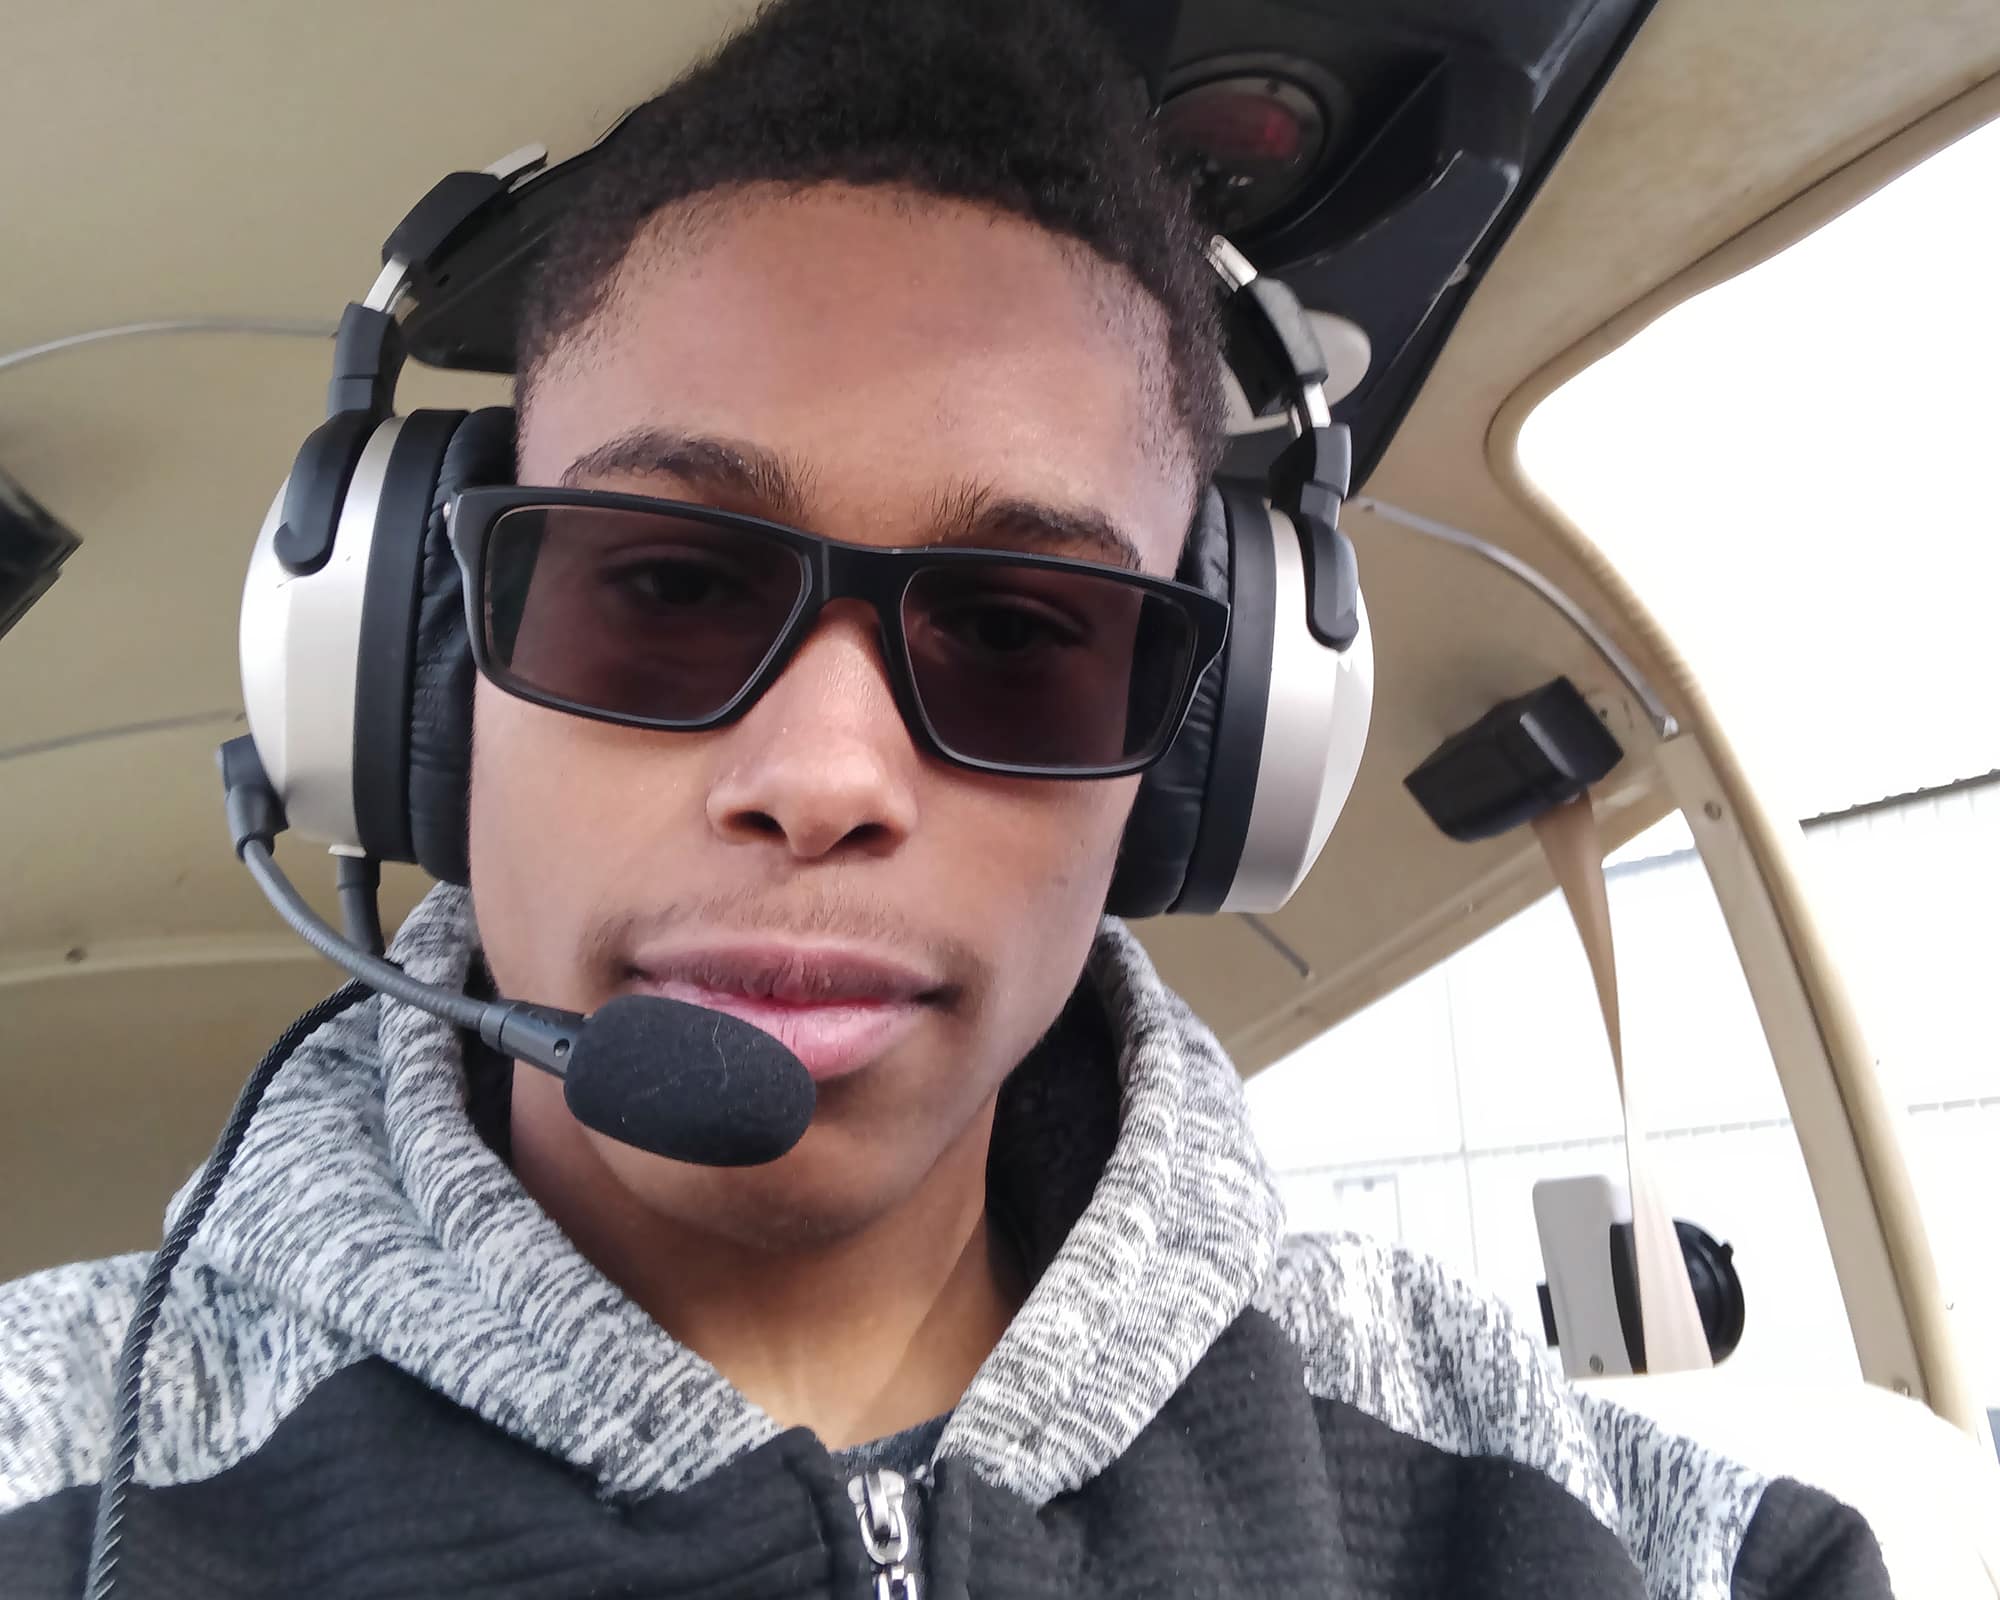 With headset in place, Josiah Moise is ready to add some more flight time to the growing total in his pilot logbook. 